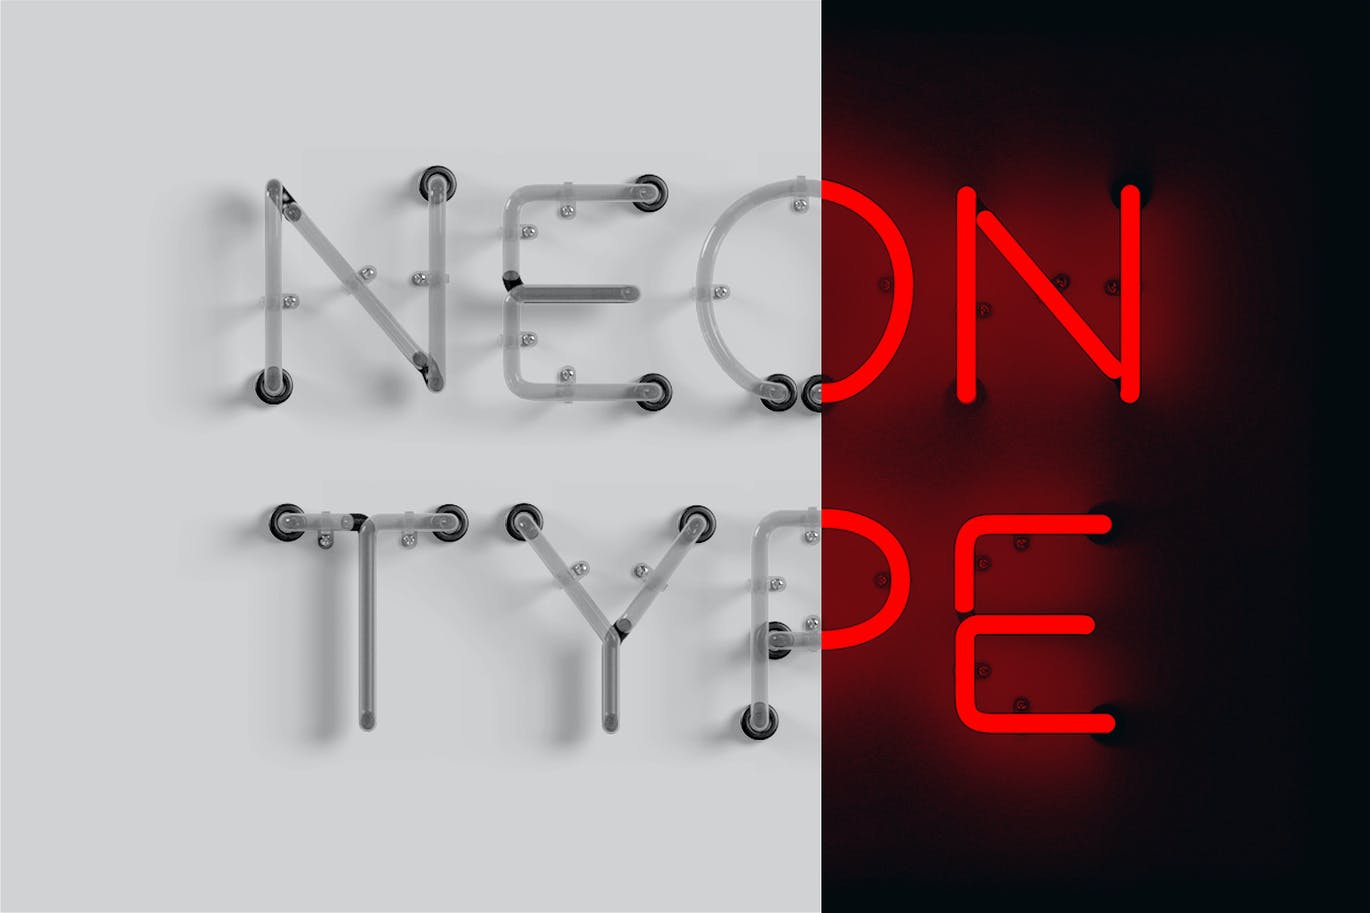 A neon type